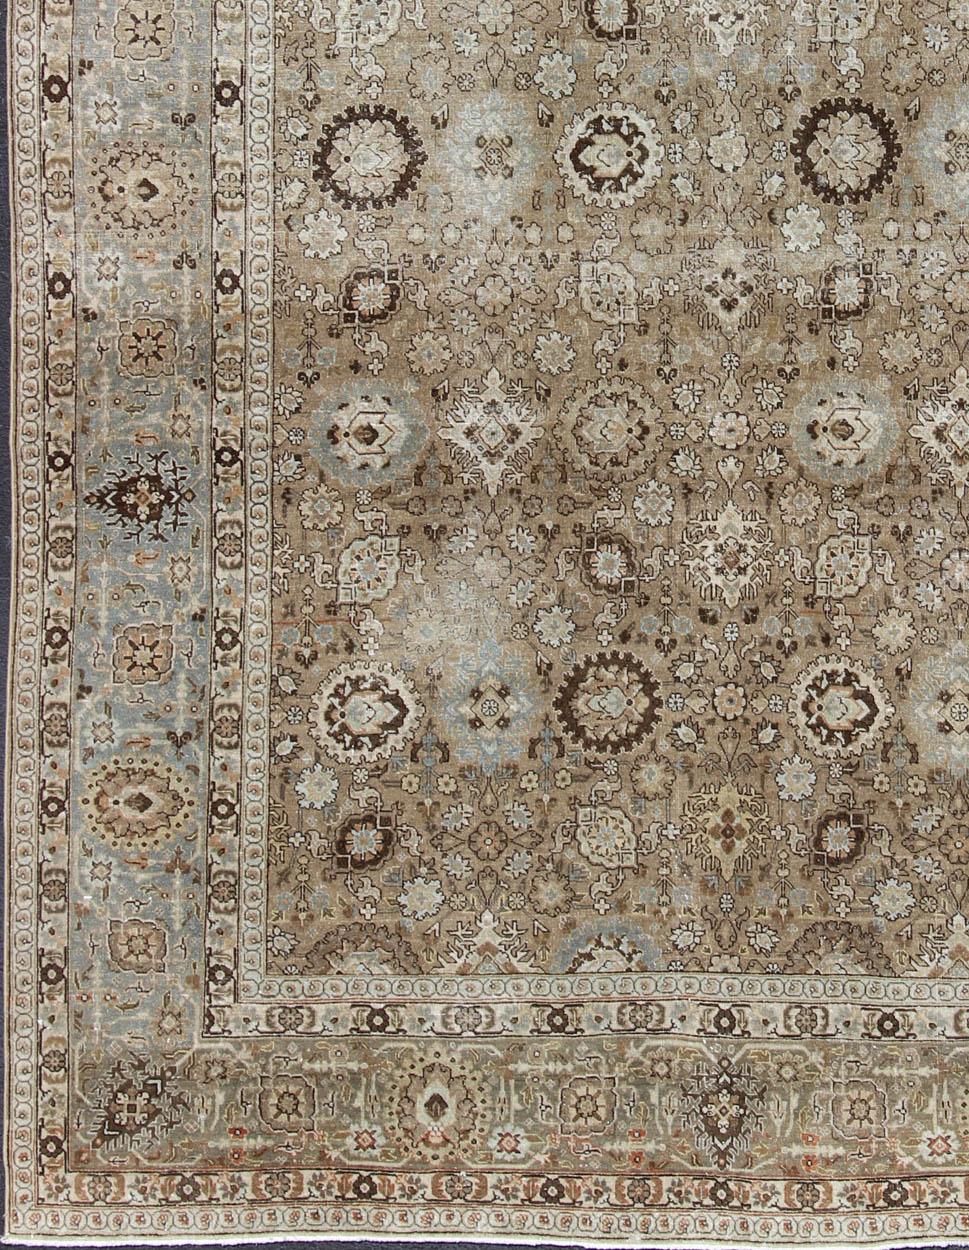 Tabriz Antique rug from Persia with all-over Floral Geometric design in earth tones, rug 18-0803, country of origin / type: Iran / Tabriz, circa 1920

This antique Persian Tabriz carpet features a refined palate of mocha, camel, brown, gray, and